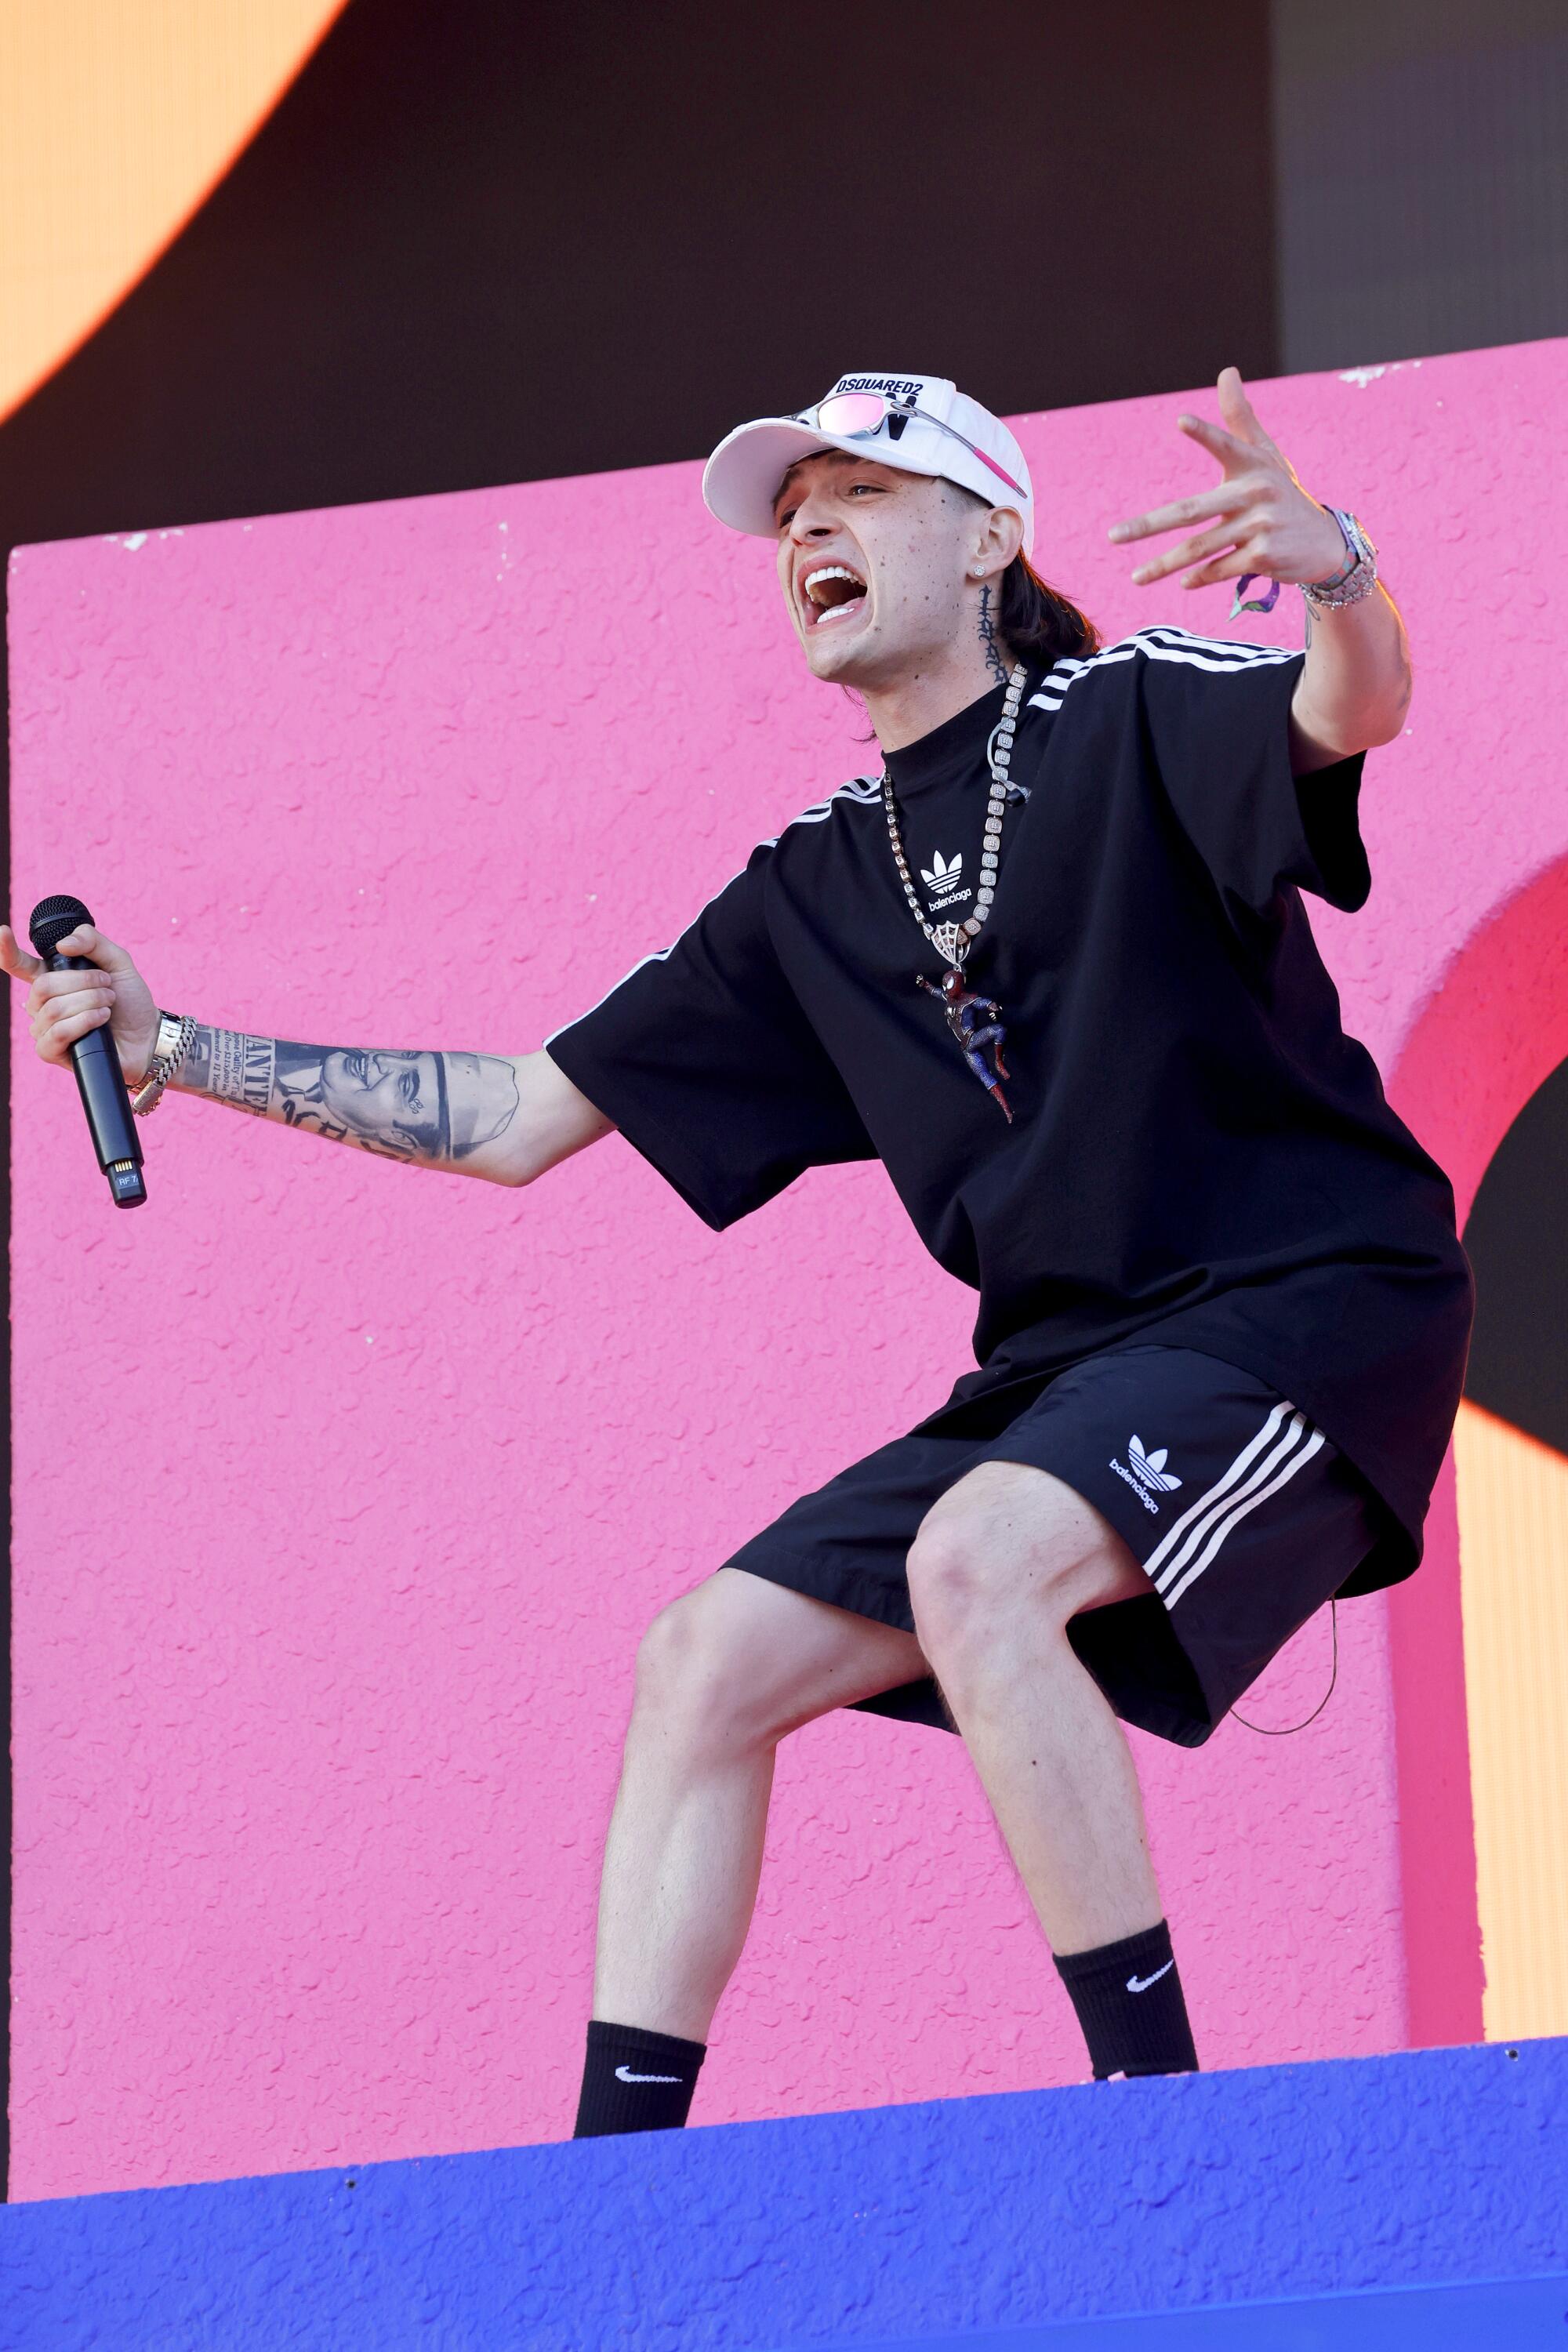 A Latin singer in black shorts and black T-shirt performing onstage and exhorting the crowd